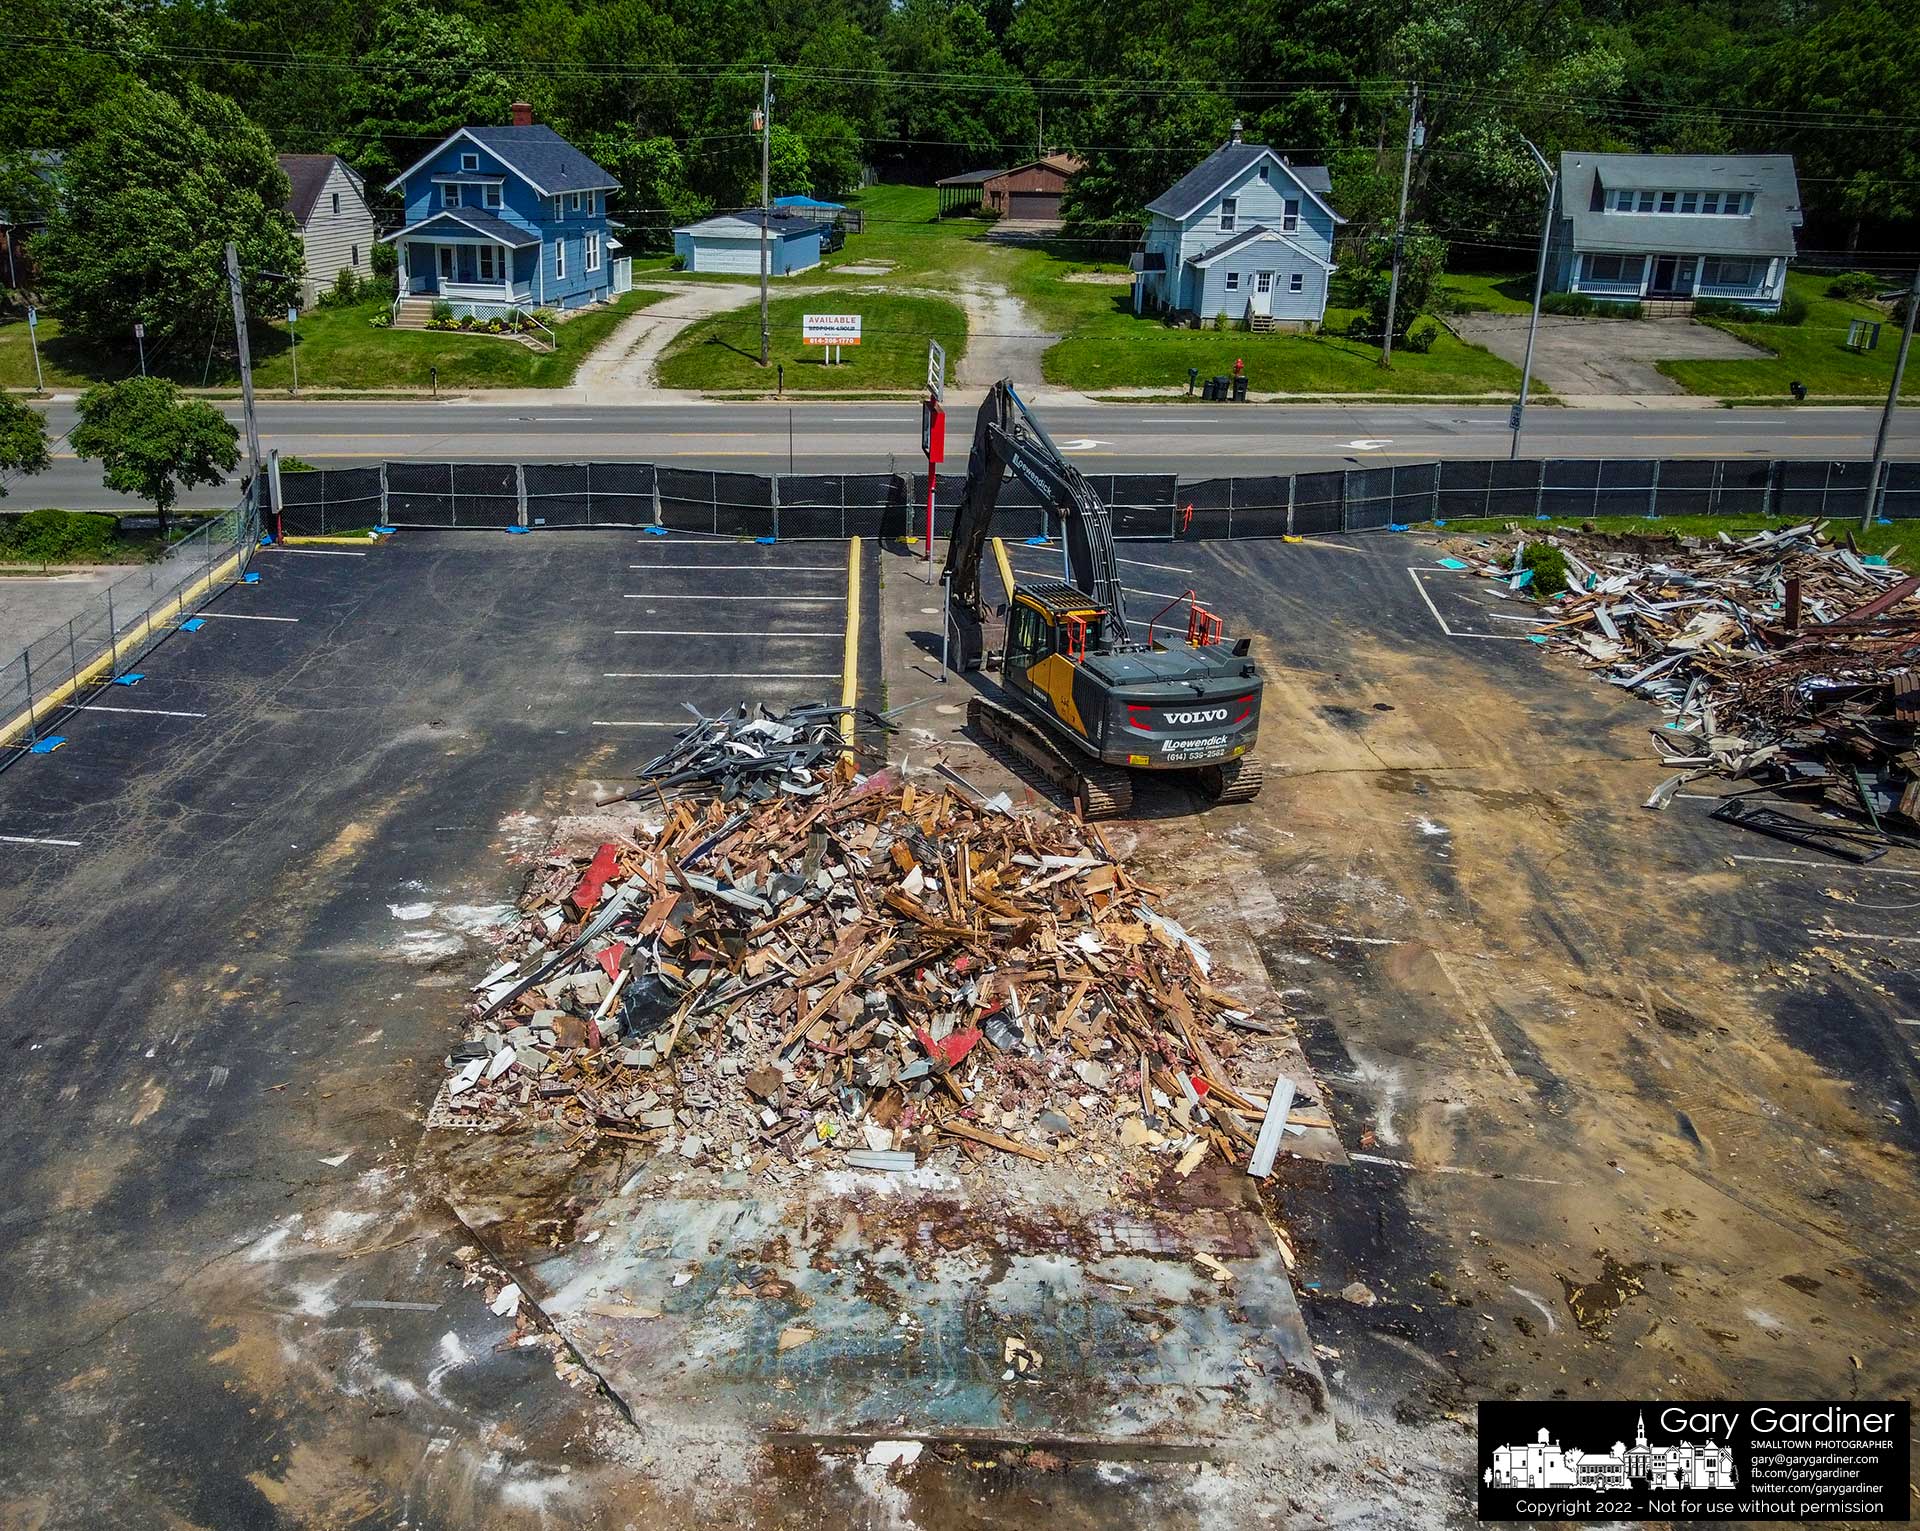 Yogi's Hoagies and two adjacent buildings lie in rubble after the first stage of demolition to make way for a Dunkin doughnut shop on South State Street. My Final Photo for May 31, 2022.